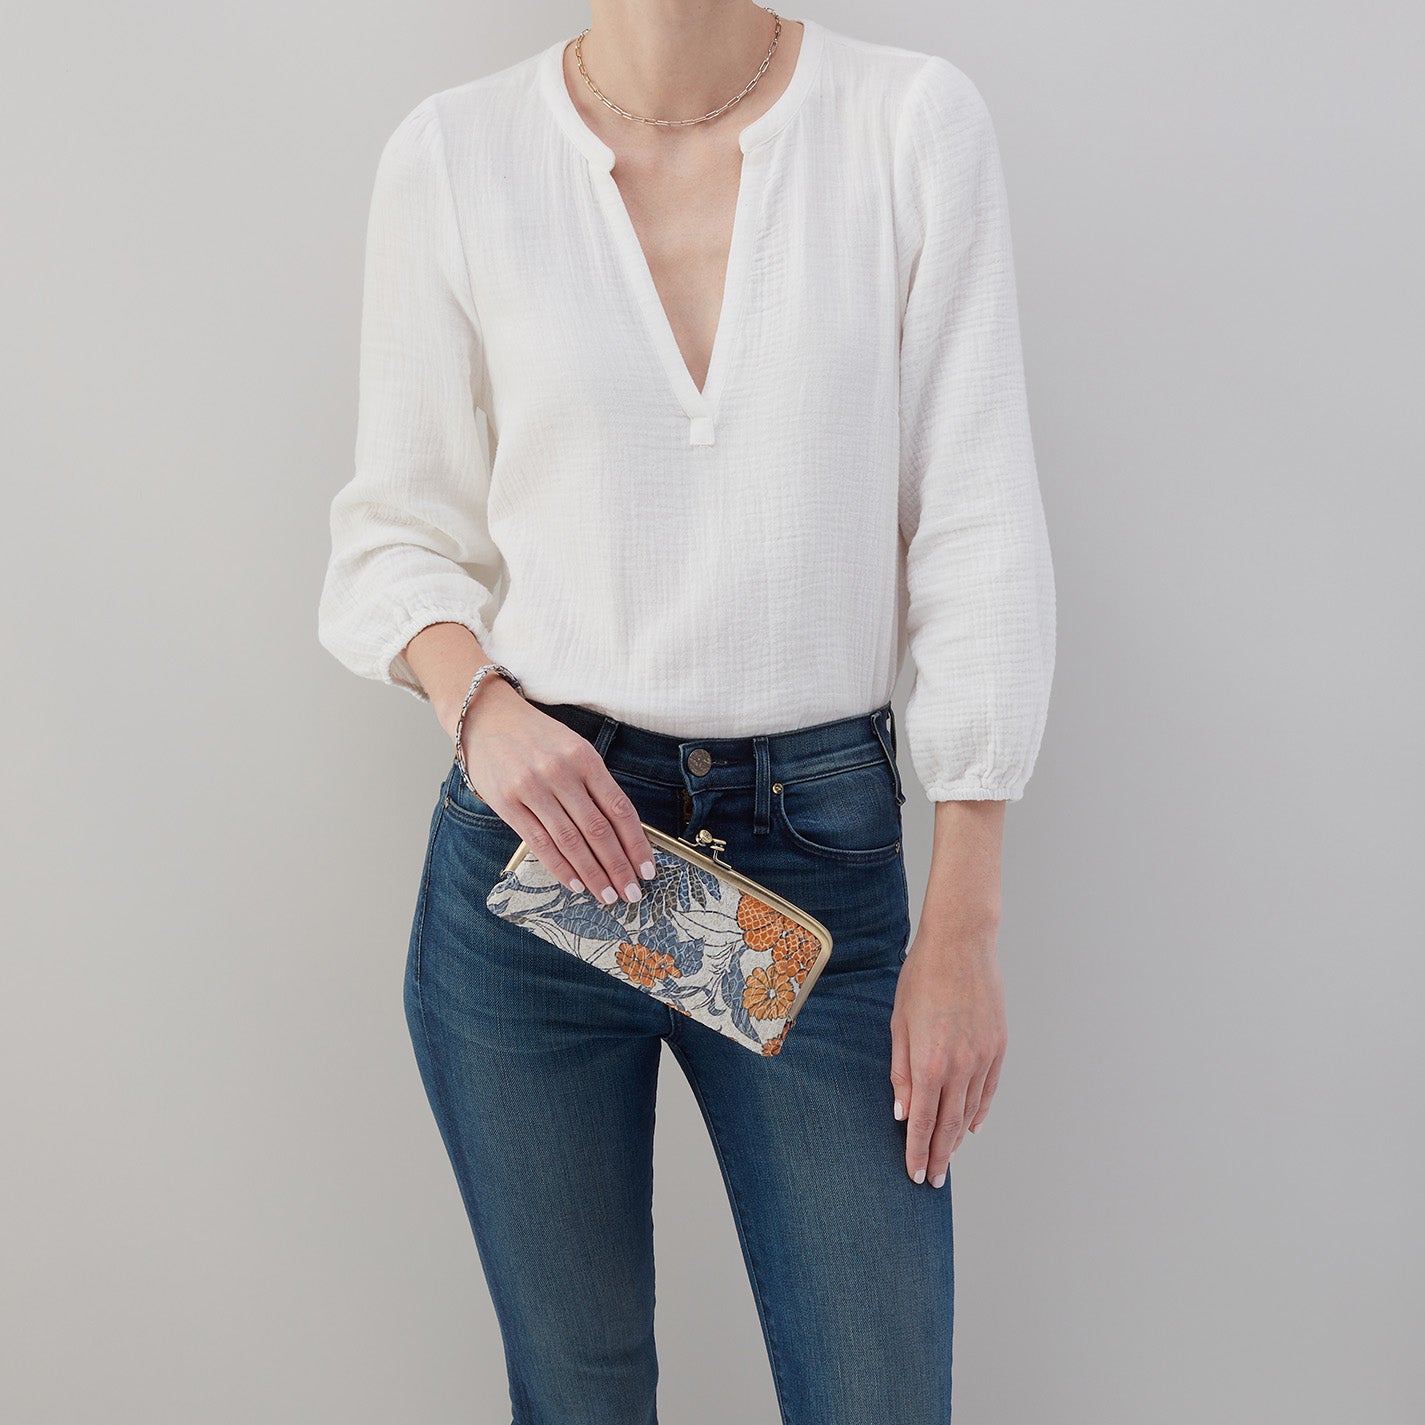 person wearing jeans and a white top holding ornage blossom Cora Large Frame Wallet as a clutch.